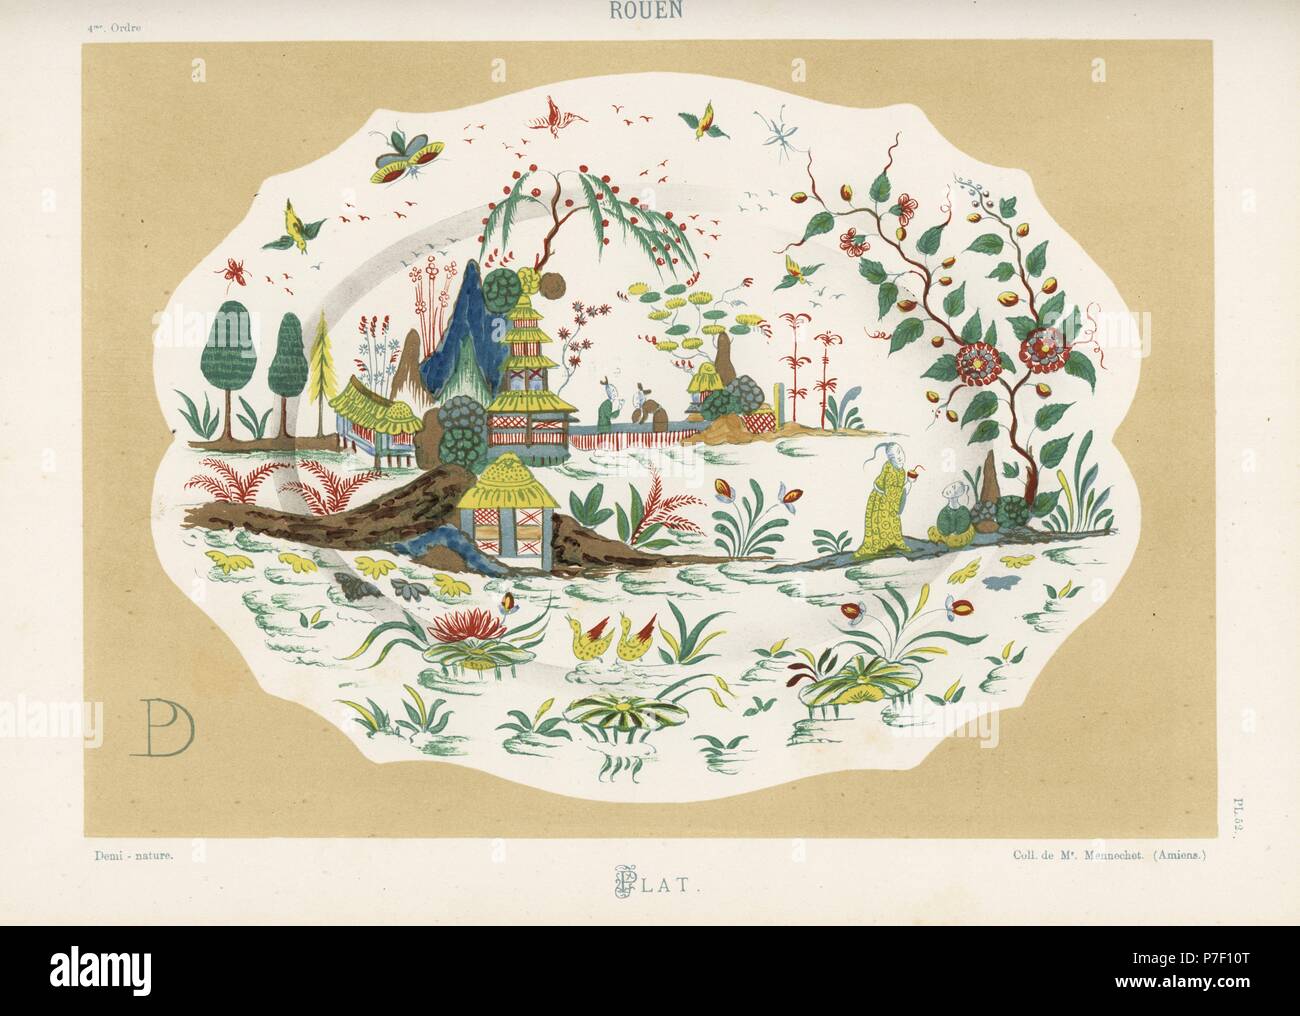 Platter from Rouen, France, with fantasy Oriental landscape of pagoda, mountains, birds and flowers in imitation chinoiserie. Hand-finished chromolithograph from Ris Paquot's General History of Ancient French and Foreign Glazed Pottery, Chez l'Auteur, Paris, 1874. Stock Photo